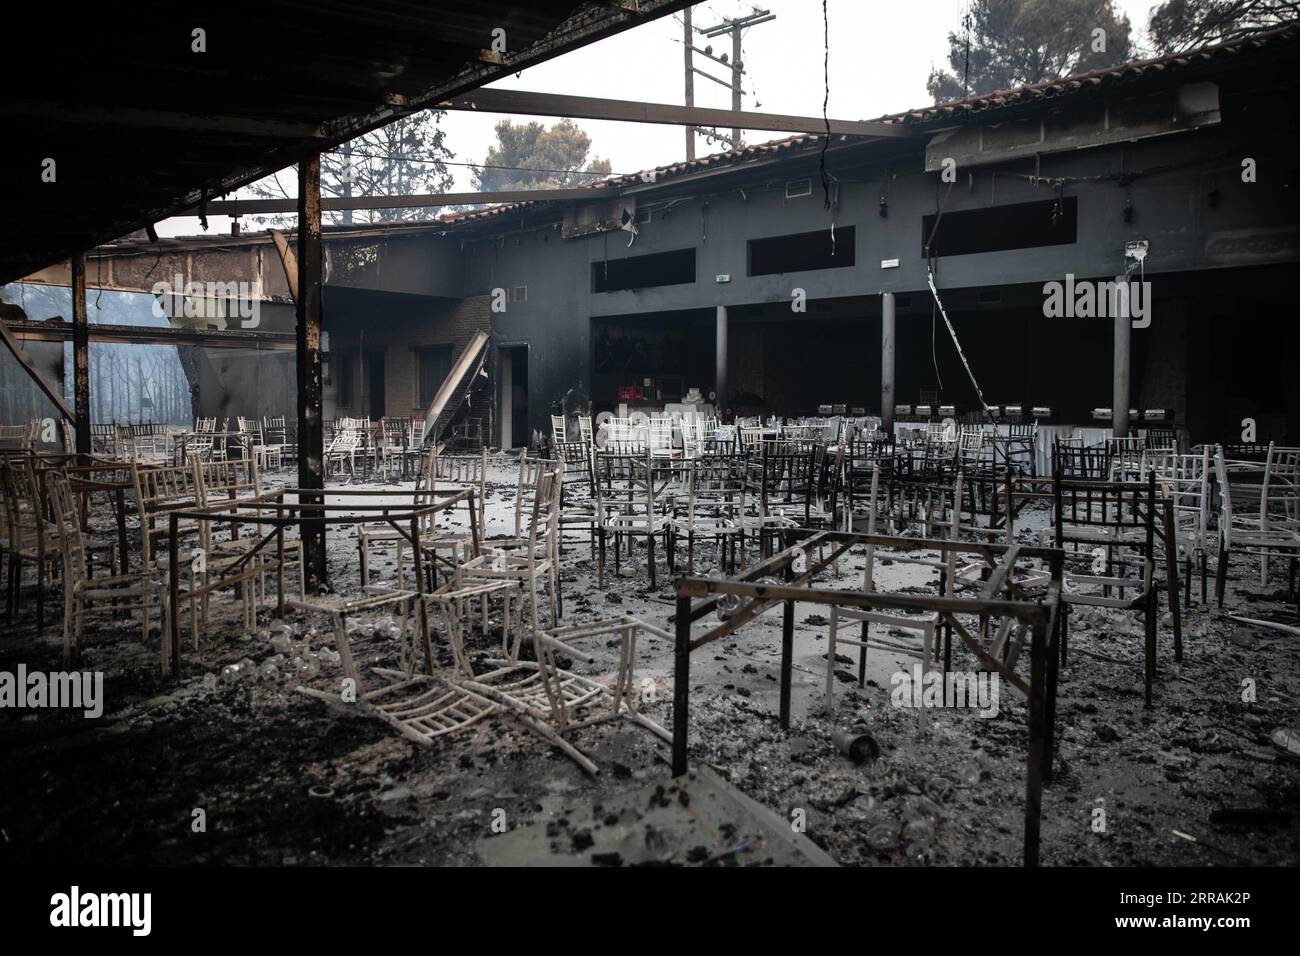 210804 -- ATHENS, Aug. 4, 2021 -- Photo shows a burned event hall after a forest fire raged in Varybobi, a northern suburb of Athens, Greece, Aug. 4, 2021. The fire in Varybobi in the north of Athens has burnt approximately 1,250 hectares of forest and other land, while almost 100 houses, dozens of cars and 27 businesses have been damaged so far, Greek Deputy Minister for Civil Protection and Crisis Management Nikos Hardalias told a press briefing here on Wednesday. Photo by /Xinhua GREECE-ATHENS-WILDFIRE-AFTERMATH LEFTERISxPARTSALIS PUBLICATIONxNOTxINxCHN Stock Photo